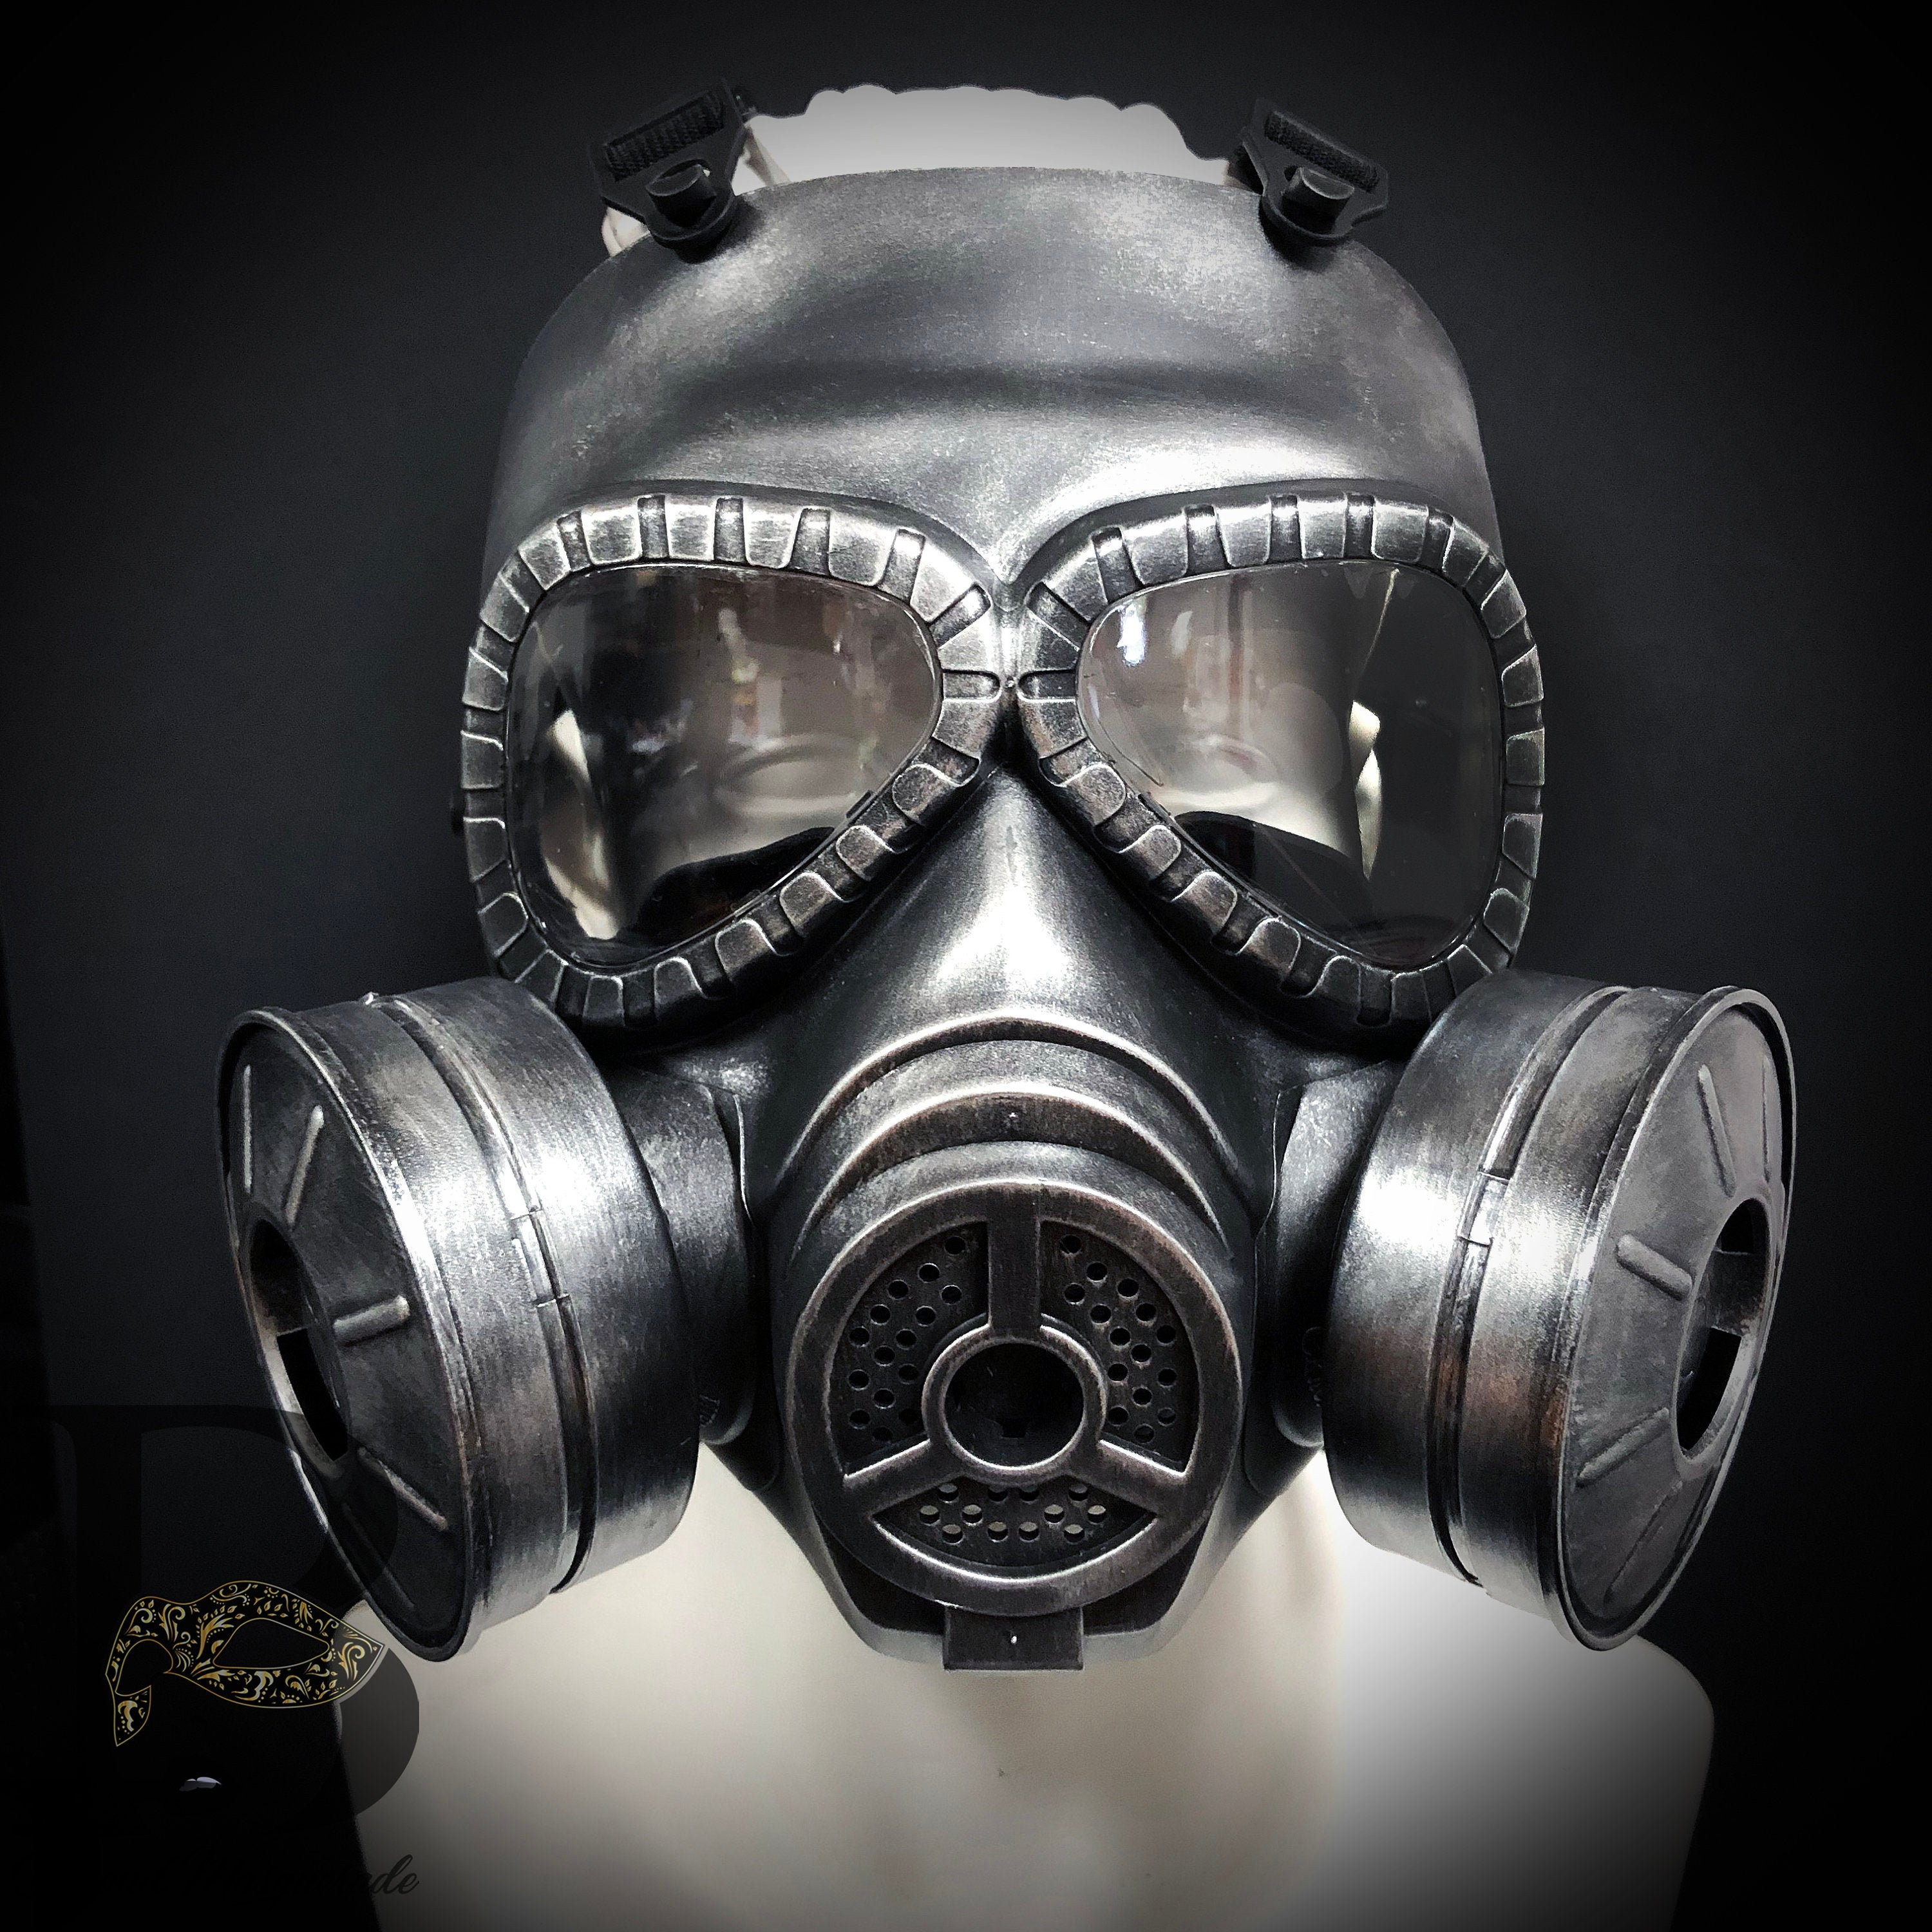 Steampunk Respirator Gas Mask Mouth Mask Full Face Gothic Masquerade Mask  Halloween Costume Mask Chrome Mask With Harness Straps 